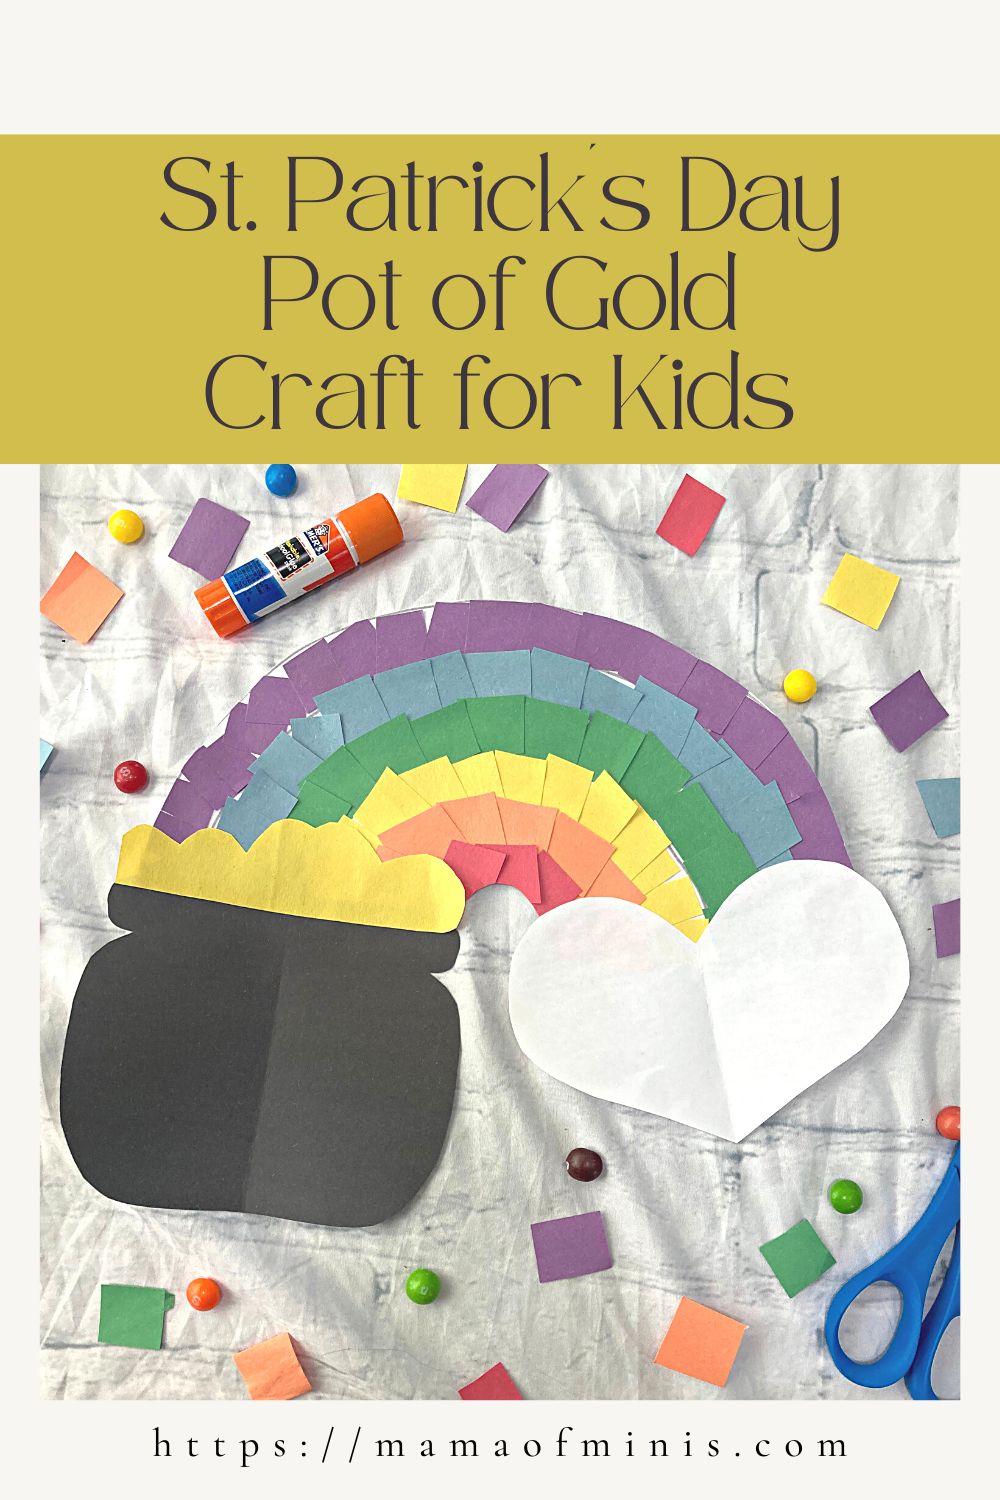 St. Patrick's Day Pot of Gold Craft for Kids 